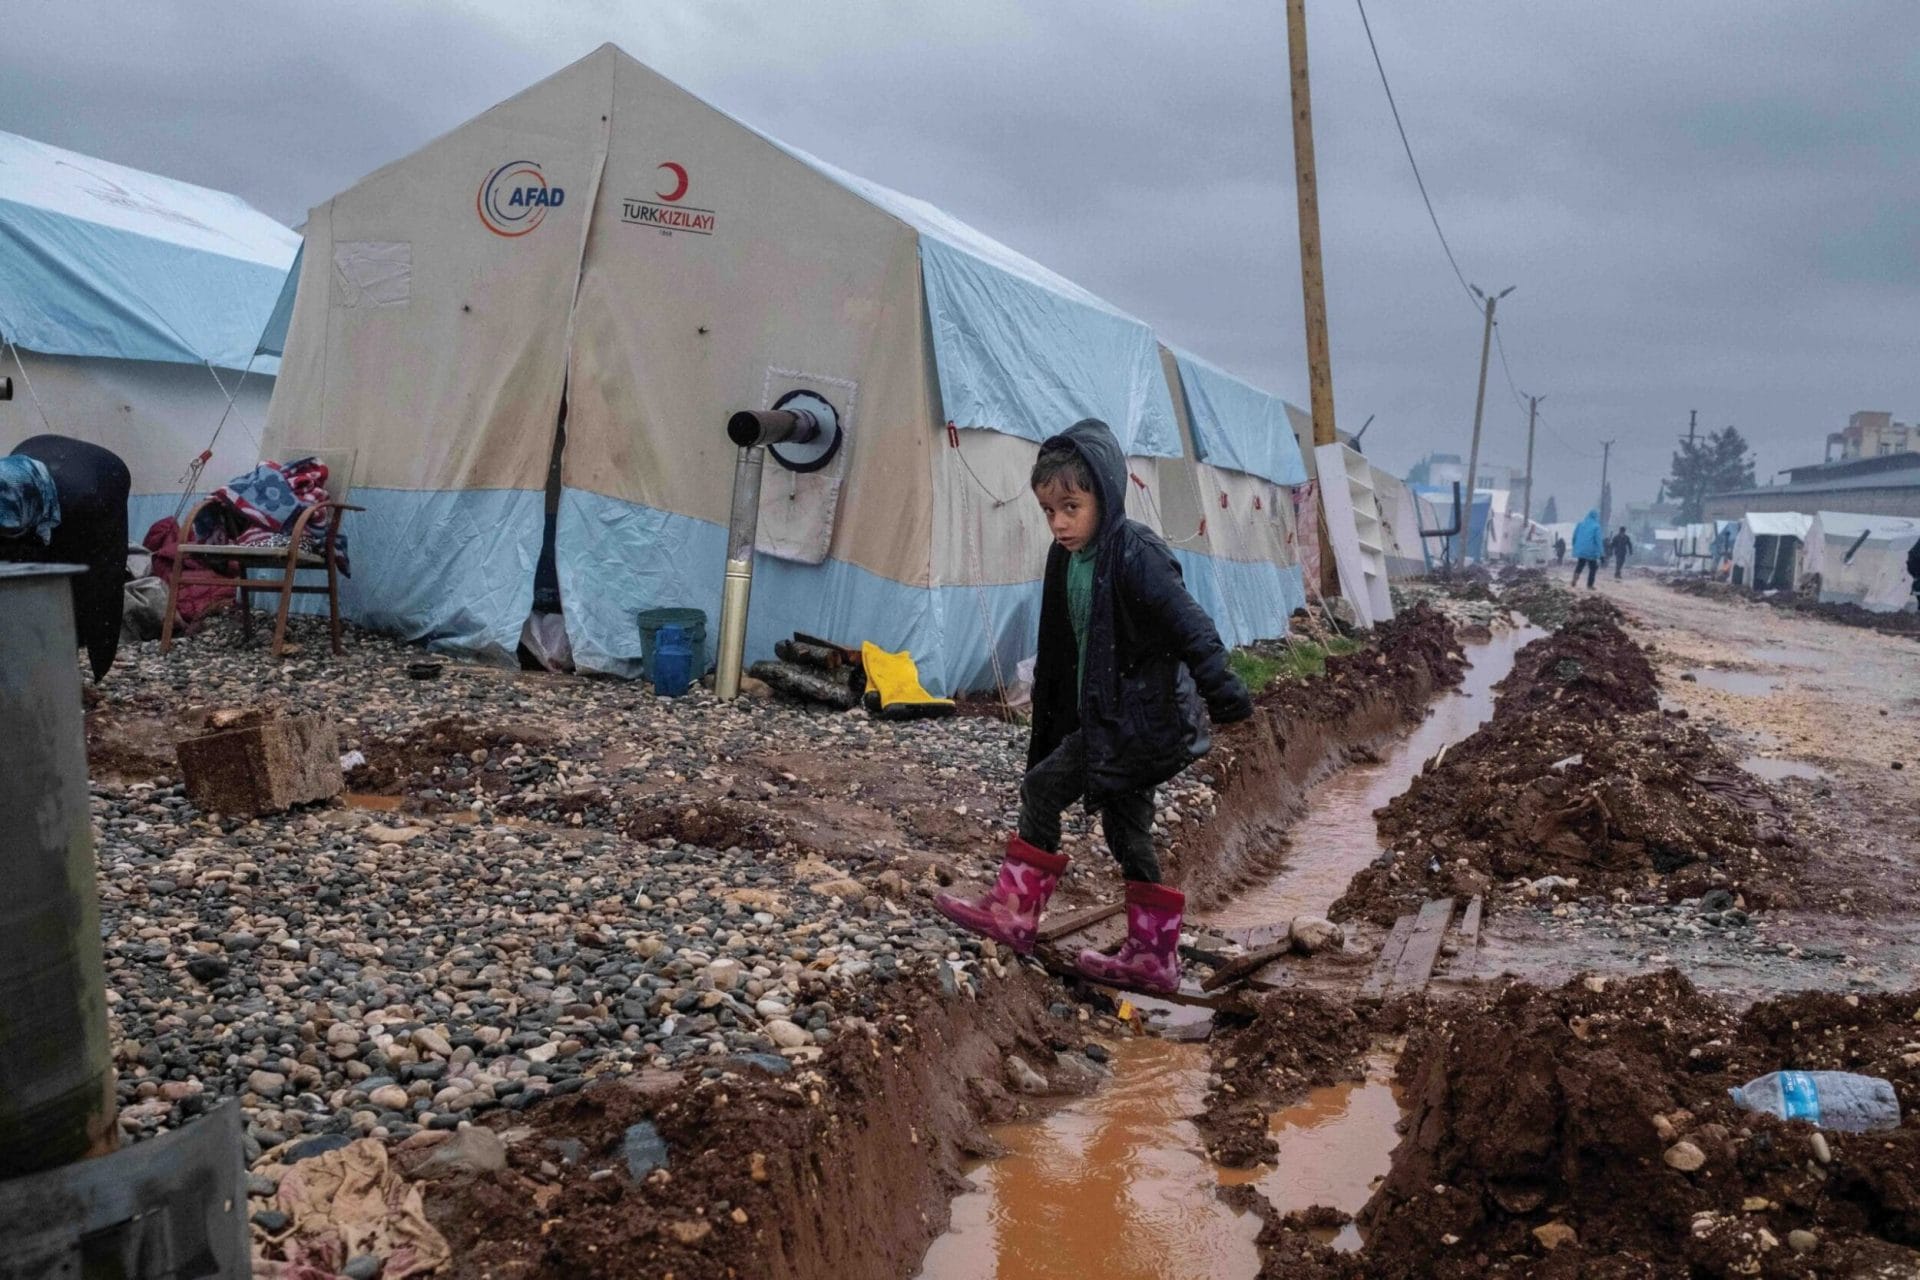 A child crosses a ditch to reach tents set up to house people displaced by the earthquakes in Adiyaman, 25th March 2023